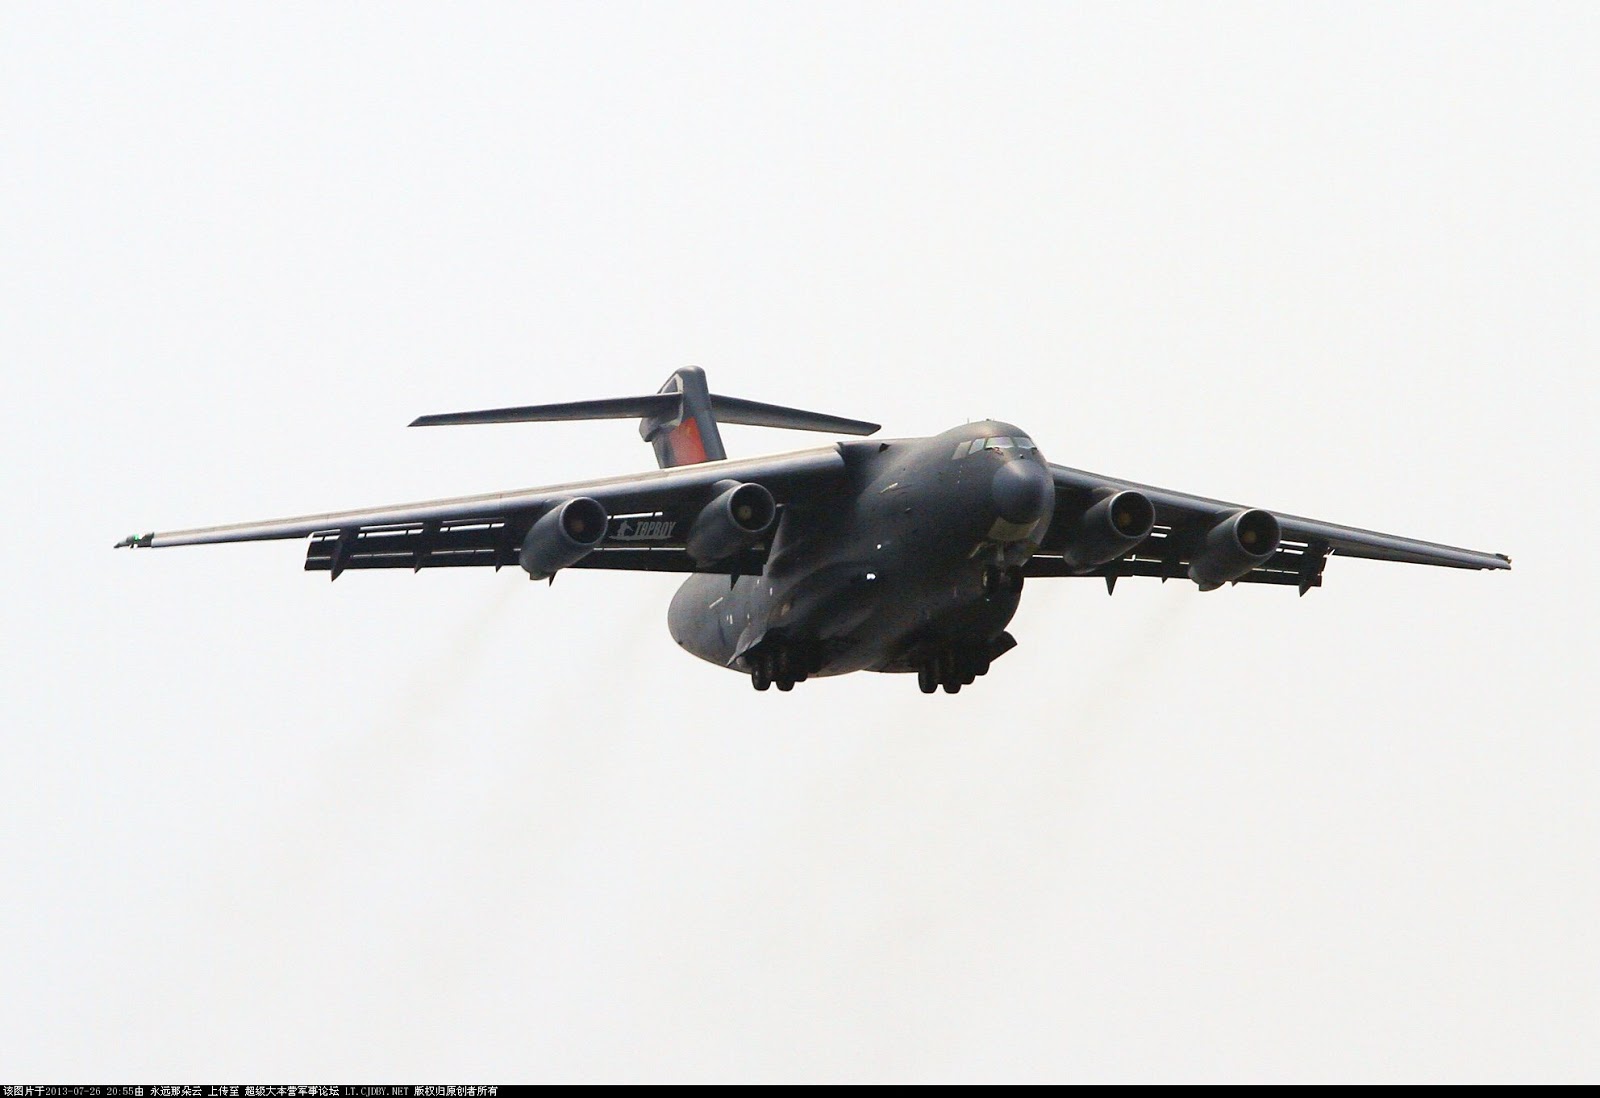  AVIC Y-20 Xian - Página 2 Y-20+China+Future+Military+Transport+Airplane+china+plaaf+air+force+refueling+aewc+aesa+import+flight+taxing+opertional+cgiexport+russia+pakistan+ws10+12+13+15+20+ps90+il-78+73+476+engine+turbofan++(1)